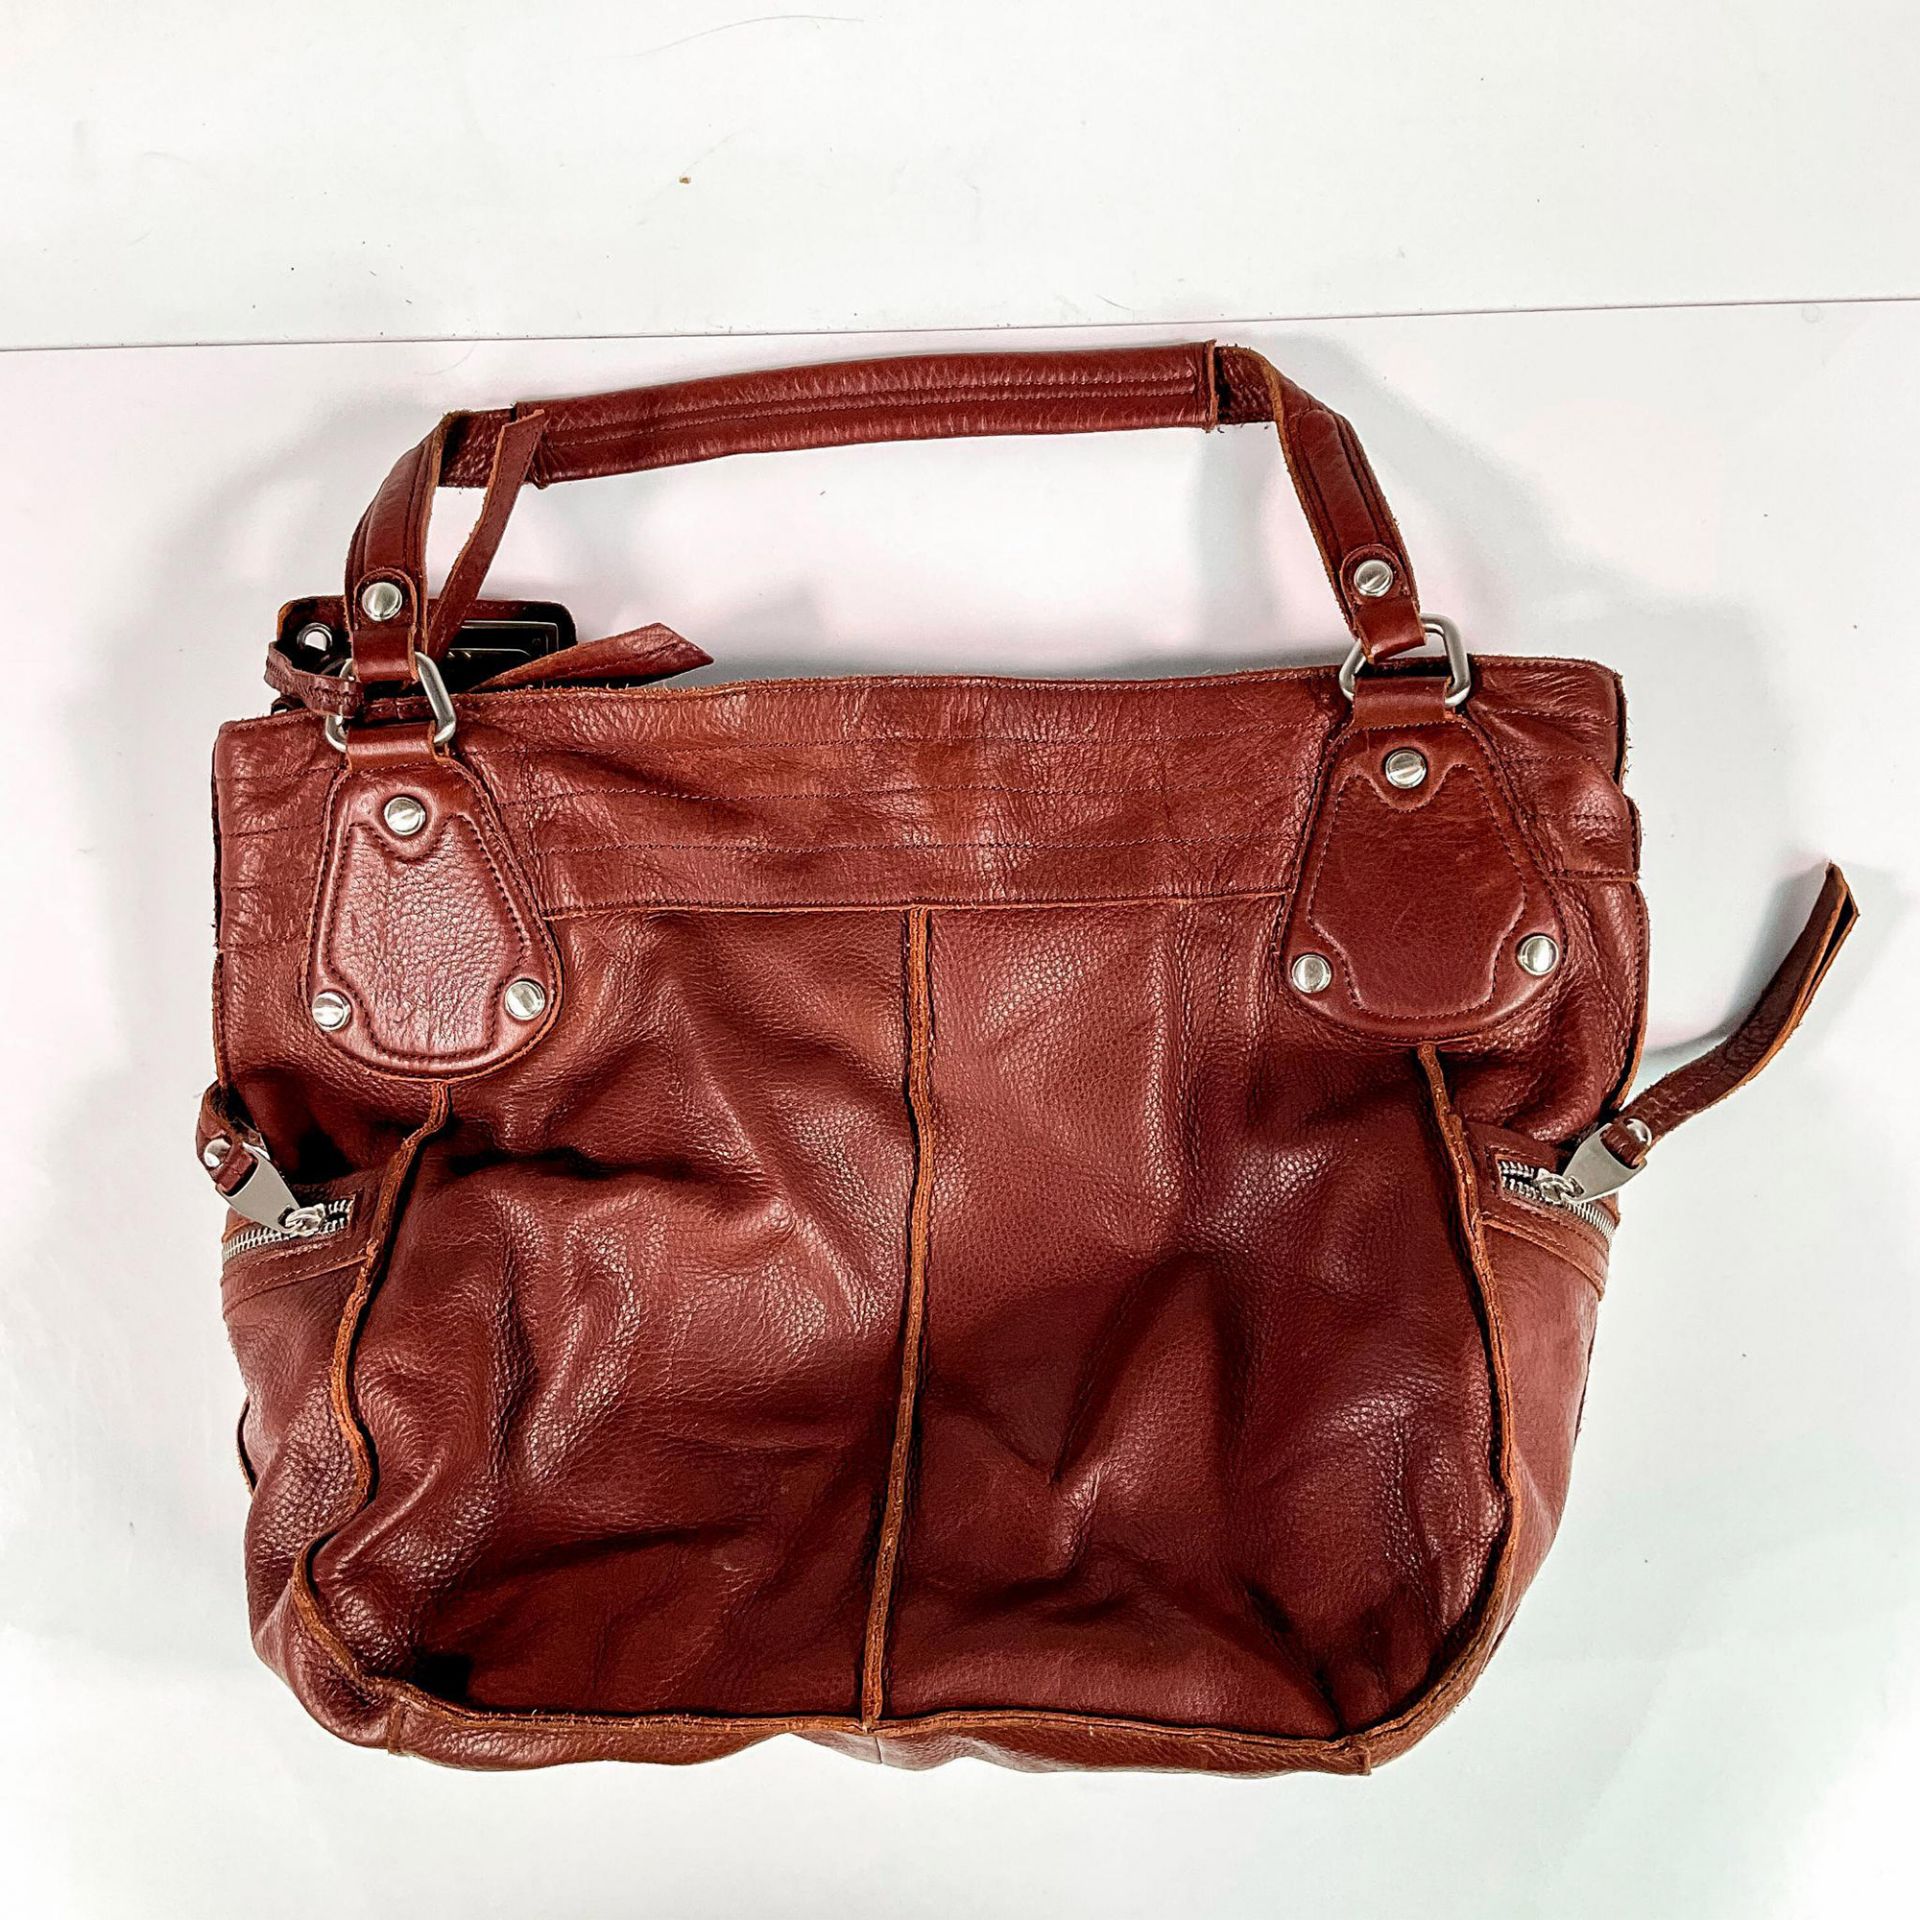 BMakowsky Leather Hobo Tote Bag - Image 2 of 6